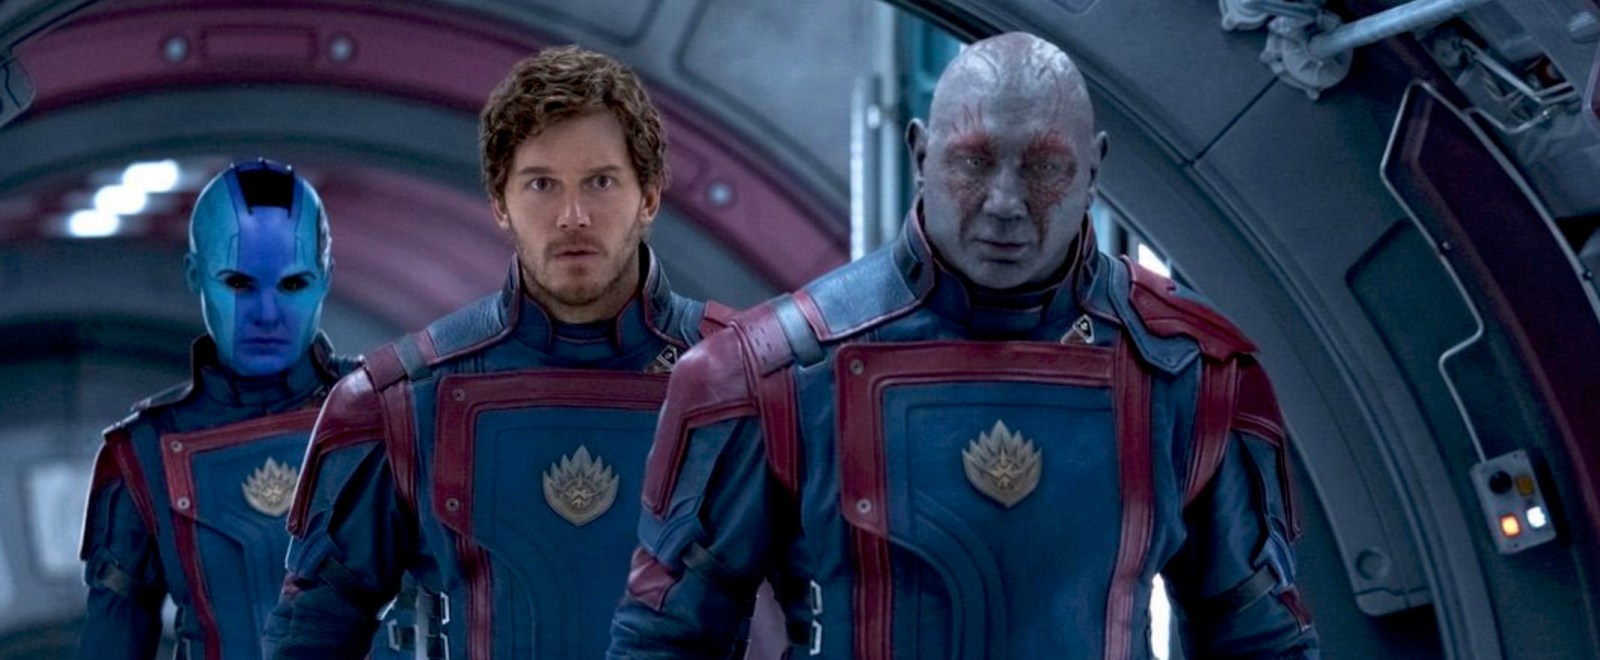 Guardians' Will Replace 'Mario' At Top Of The Box Office